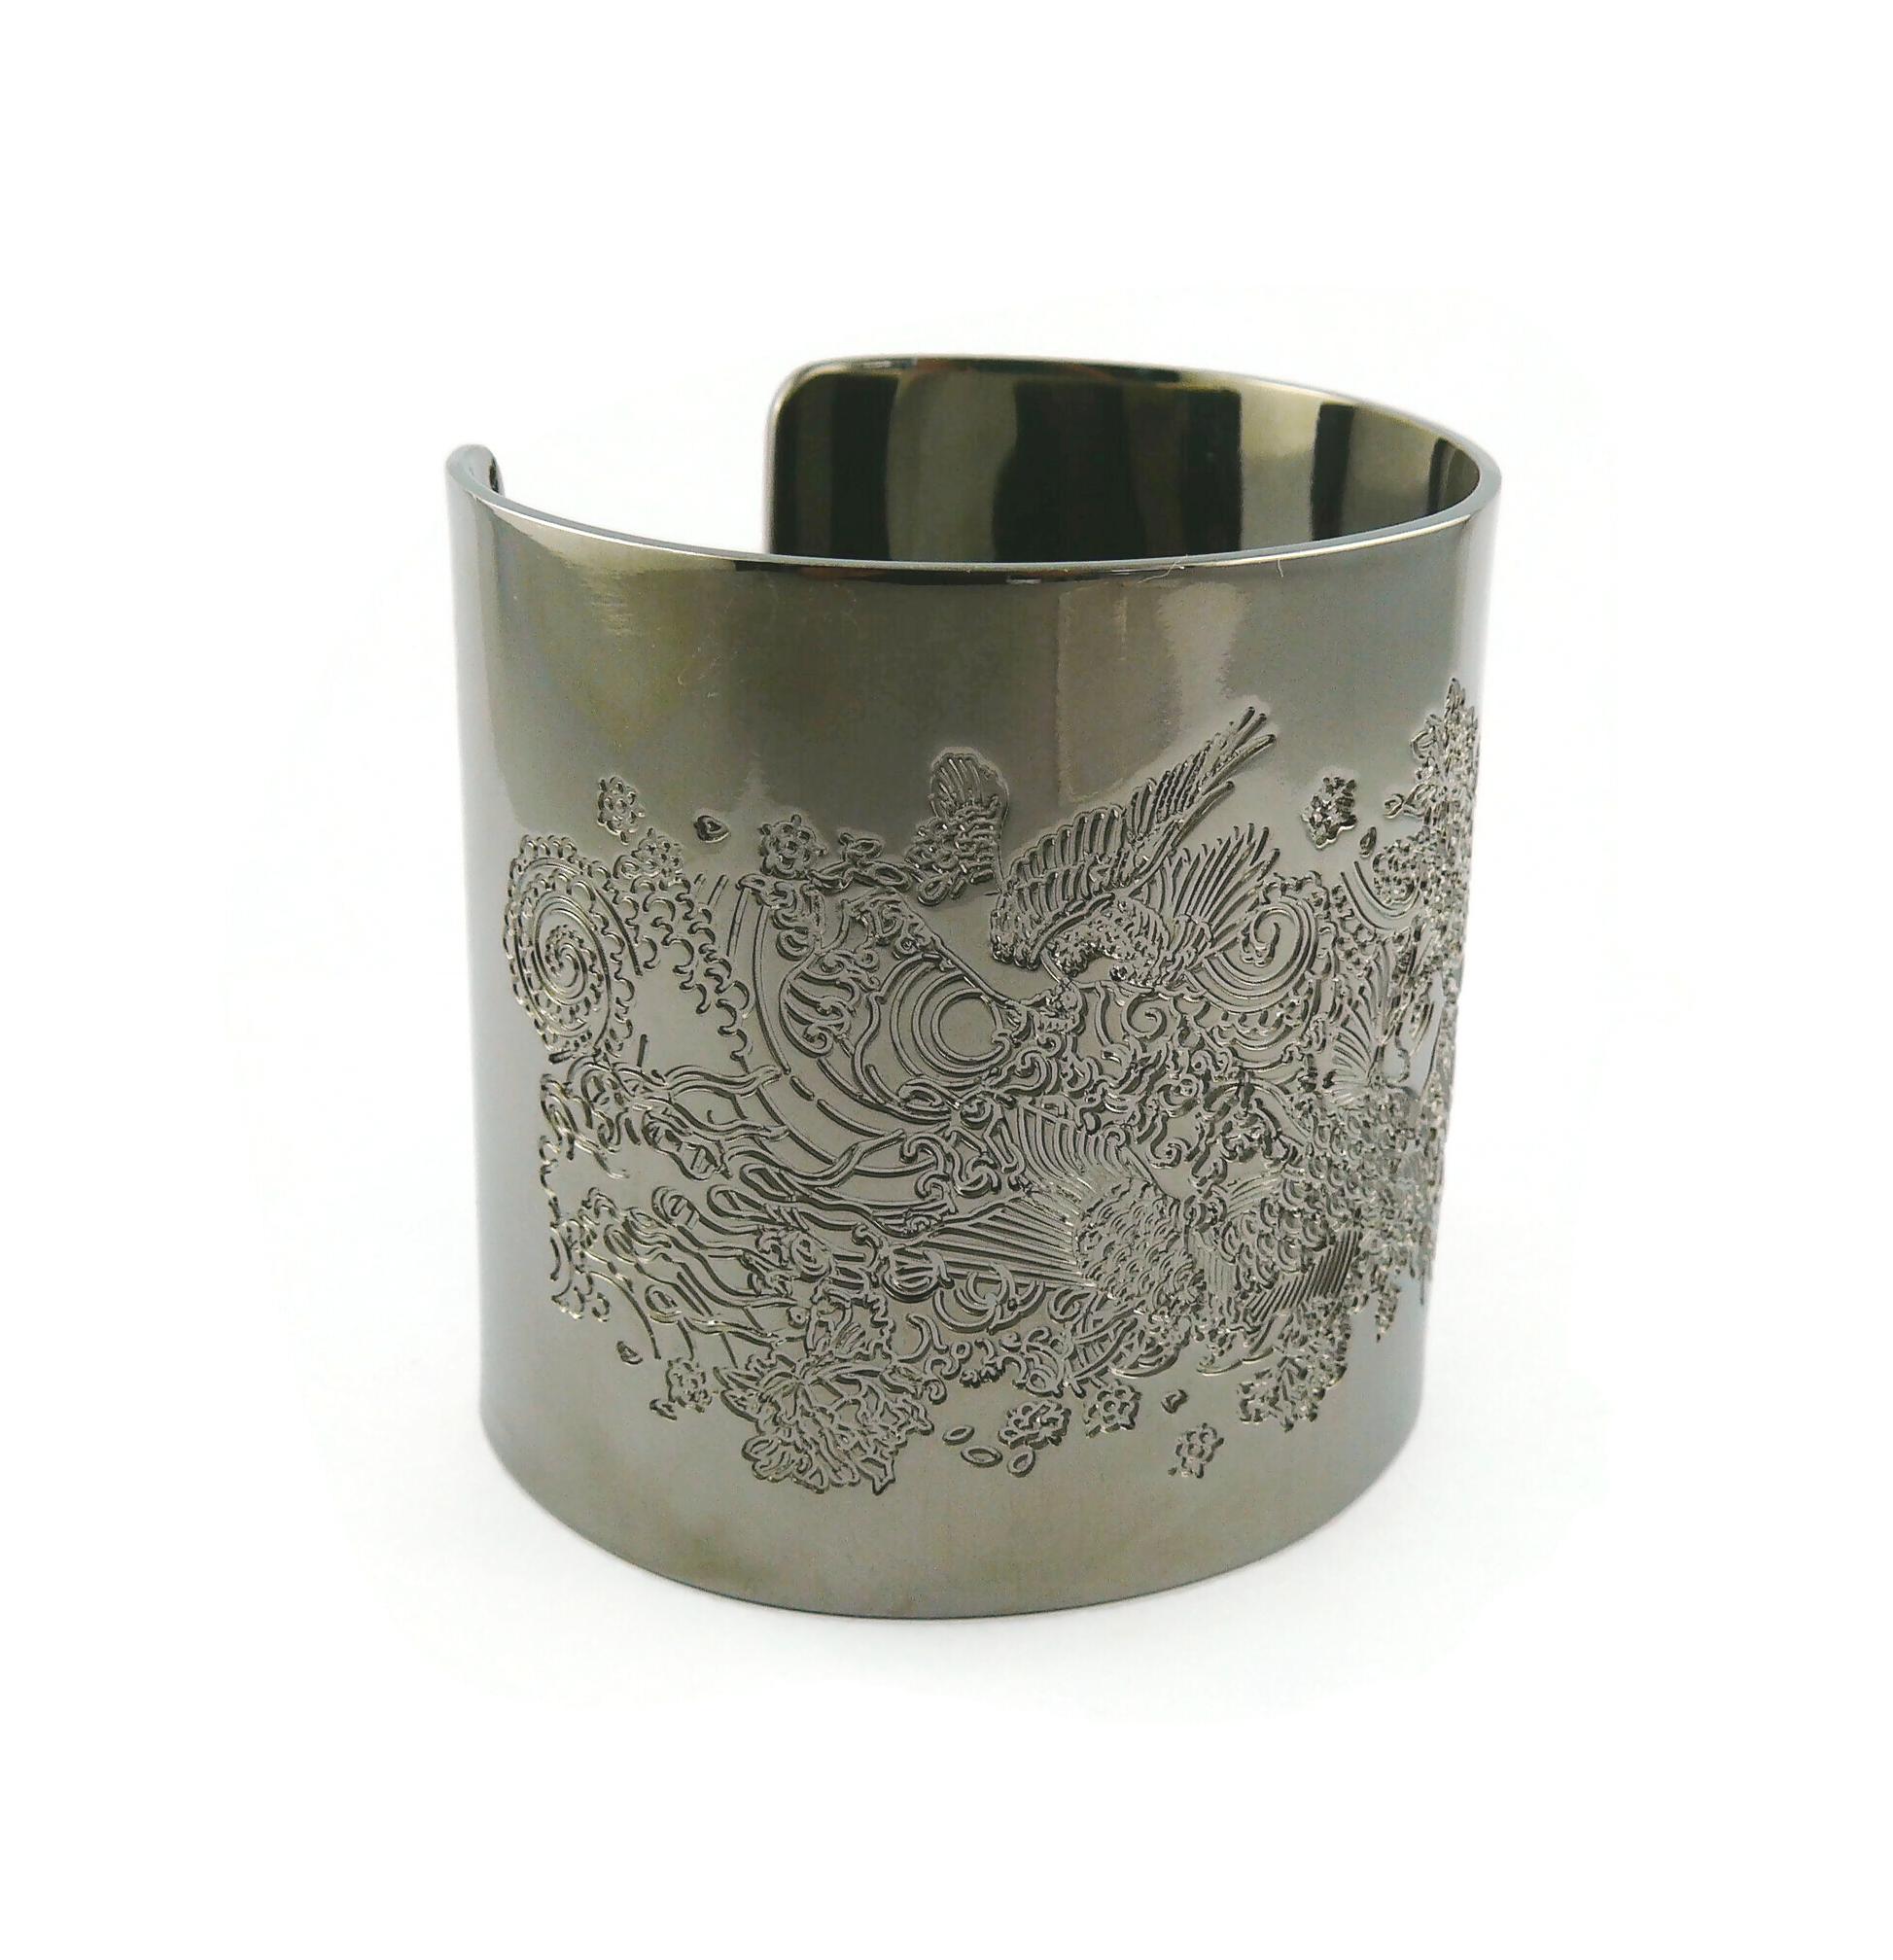 Jean Paul Gaultier Ruthenium Colour Japanese Koi Fish Tattoo Cuff Bracelet In Good Condition For Sale In Nice, FR